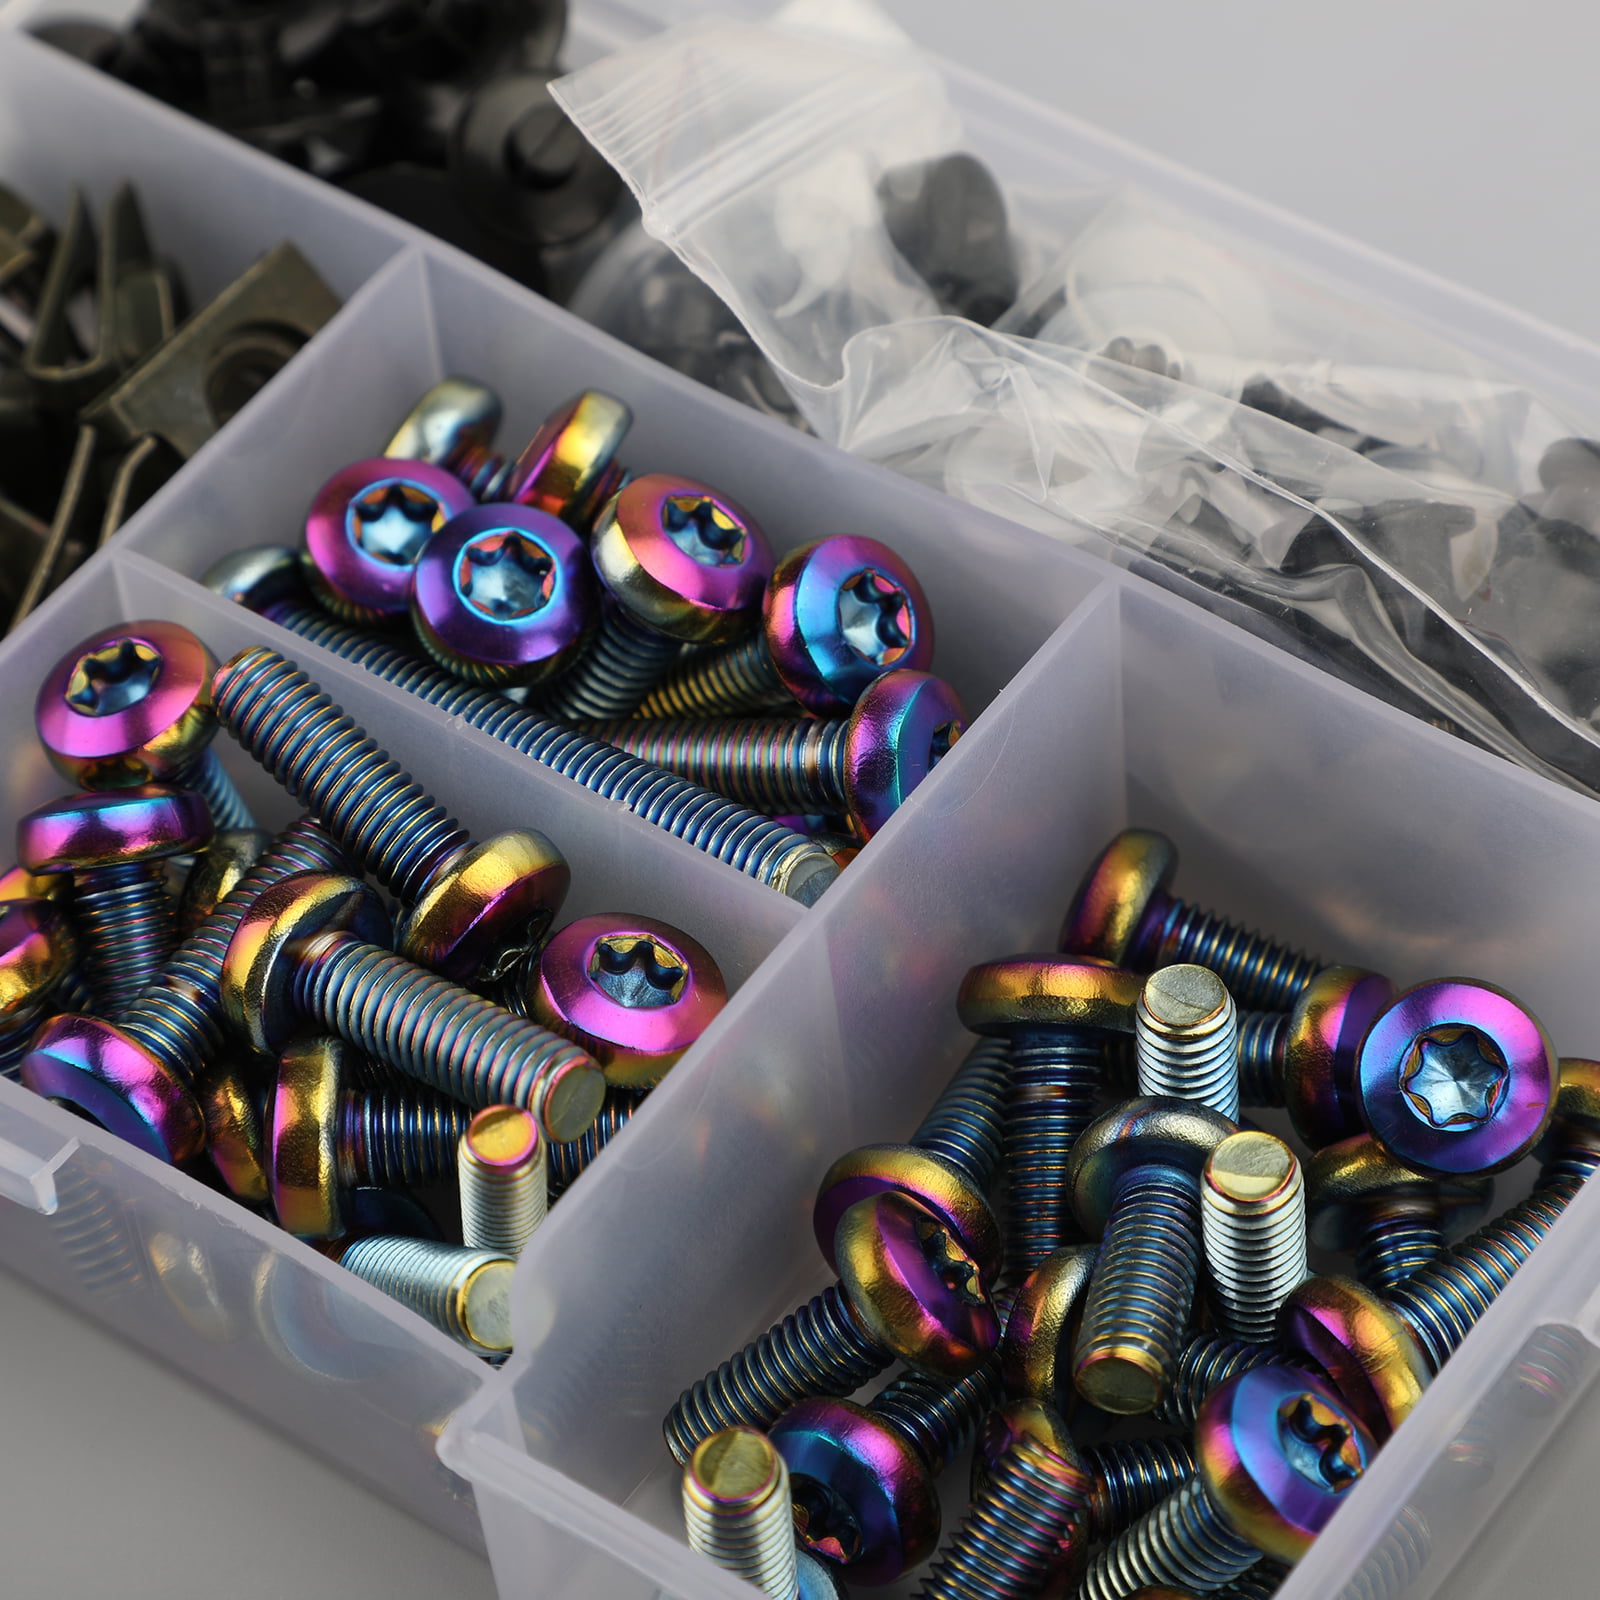 Motorcycle Fairing Bolt Kit Screws 223pcs Colorful Fasteners Bolts Mounting Washers Nuts Screws Clips For Most Of Motorcycles bolt Clip Nut For Motorcycle Windscreen M5 M6 Bodywork Screws Black-233 